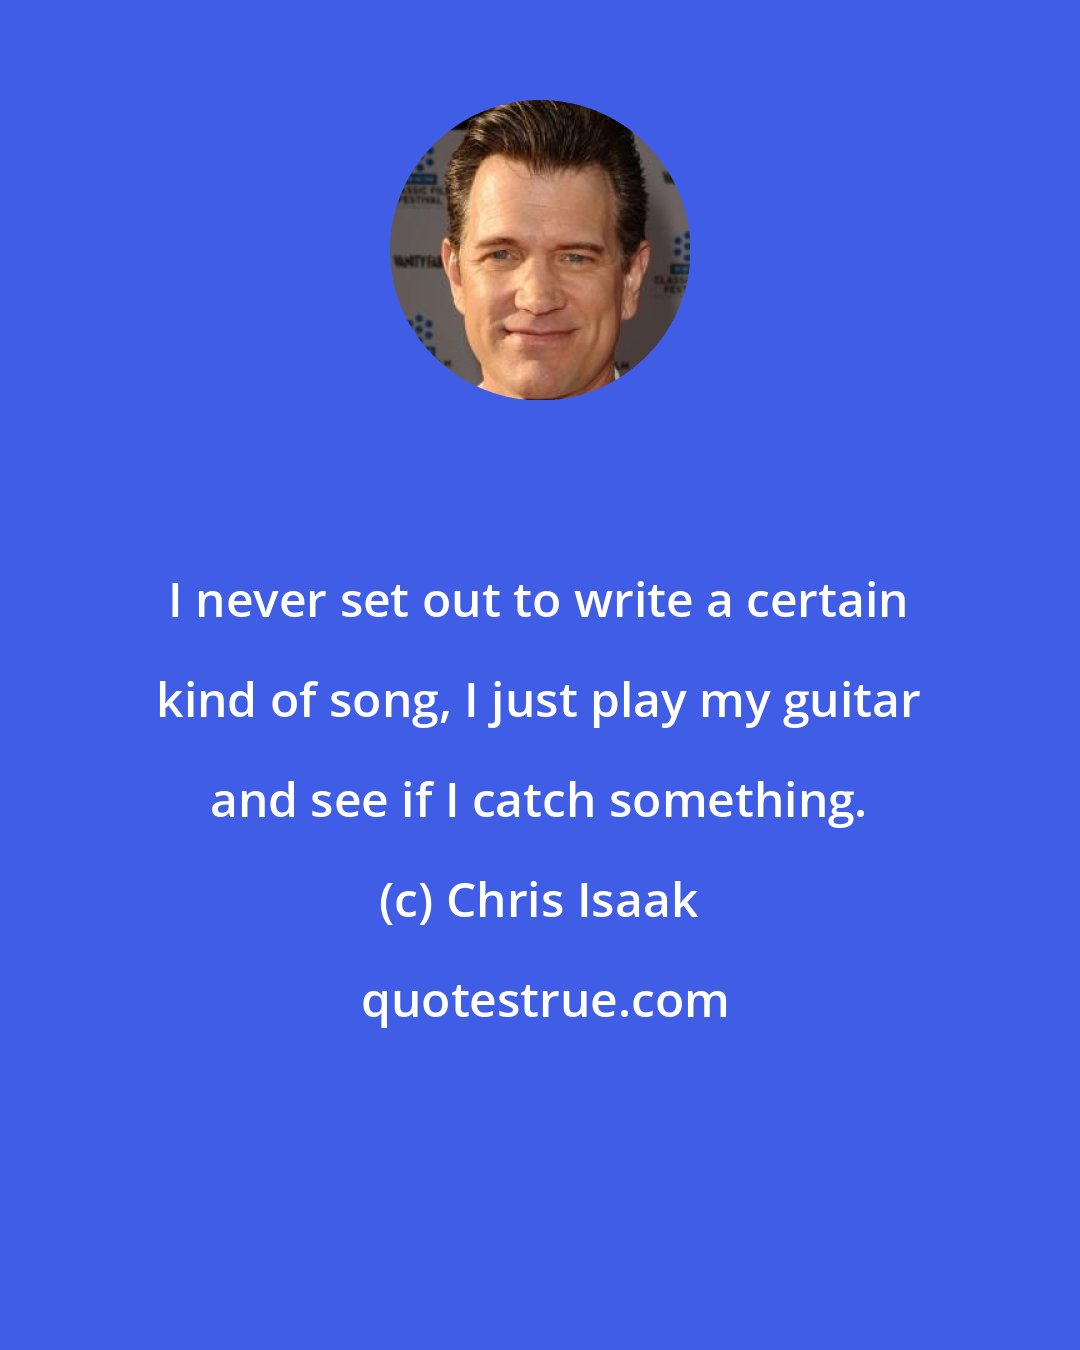 Chris Isaak: I never set out to write a certain kind of song, I just play my guitar and see if I catch something.